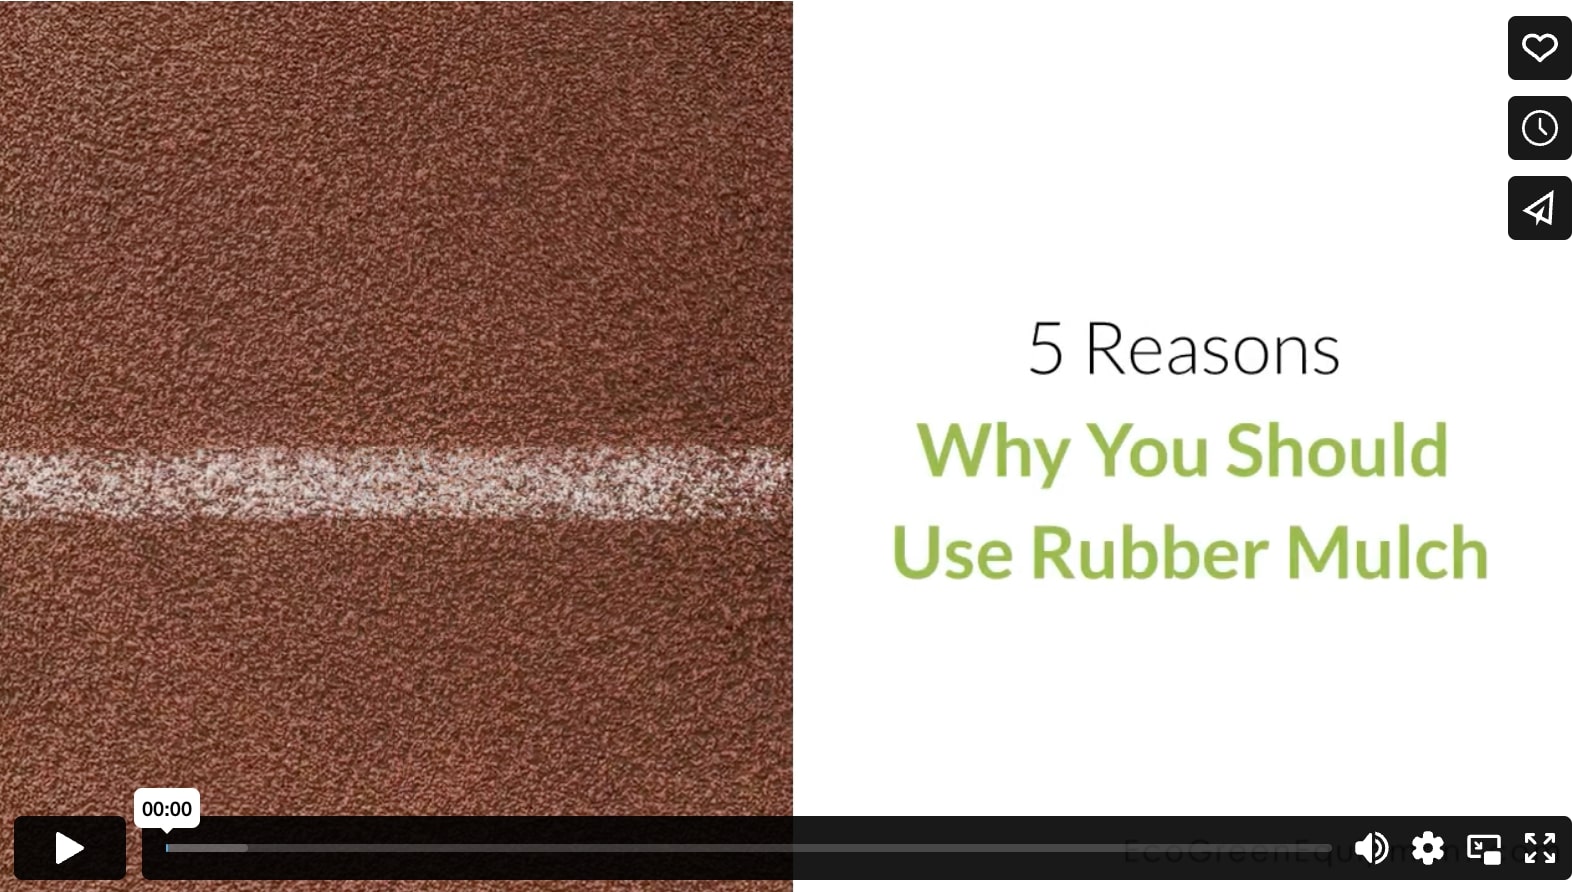 5 Reasons Why You Should Use Rubber Mulch